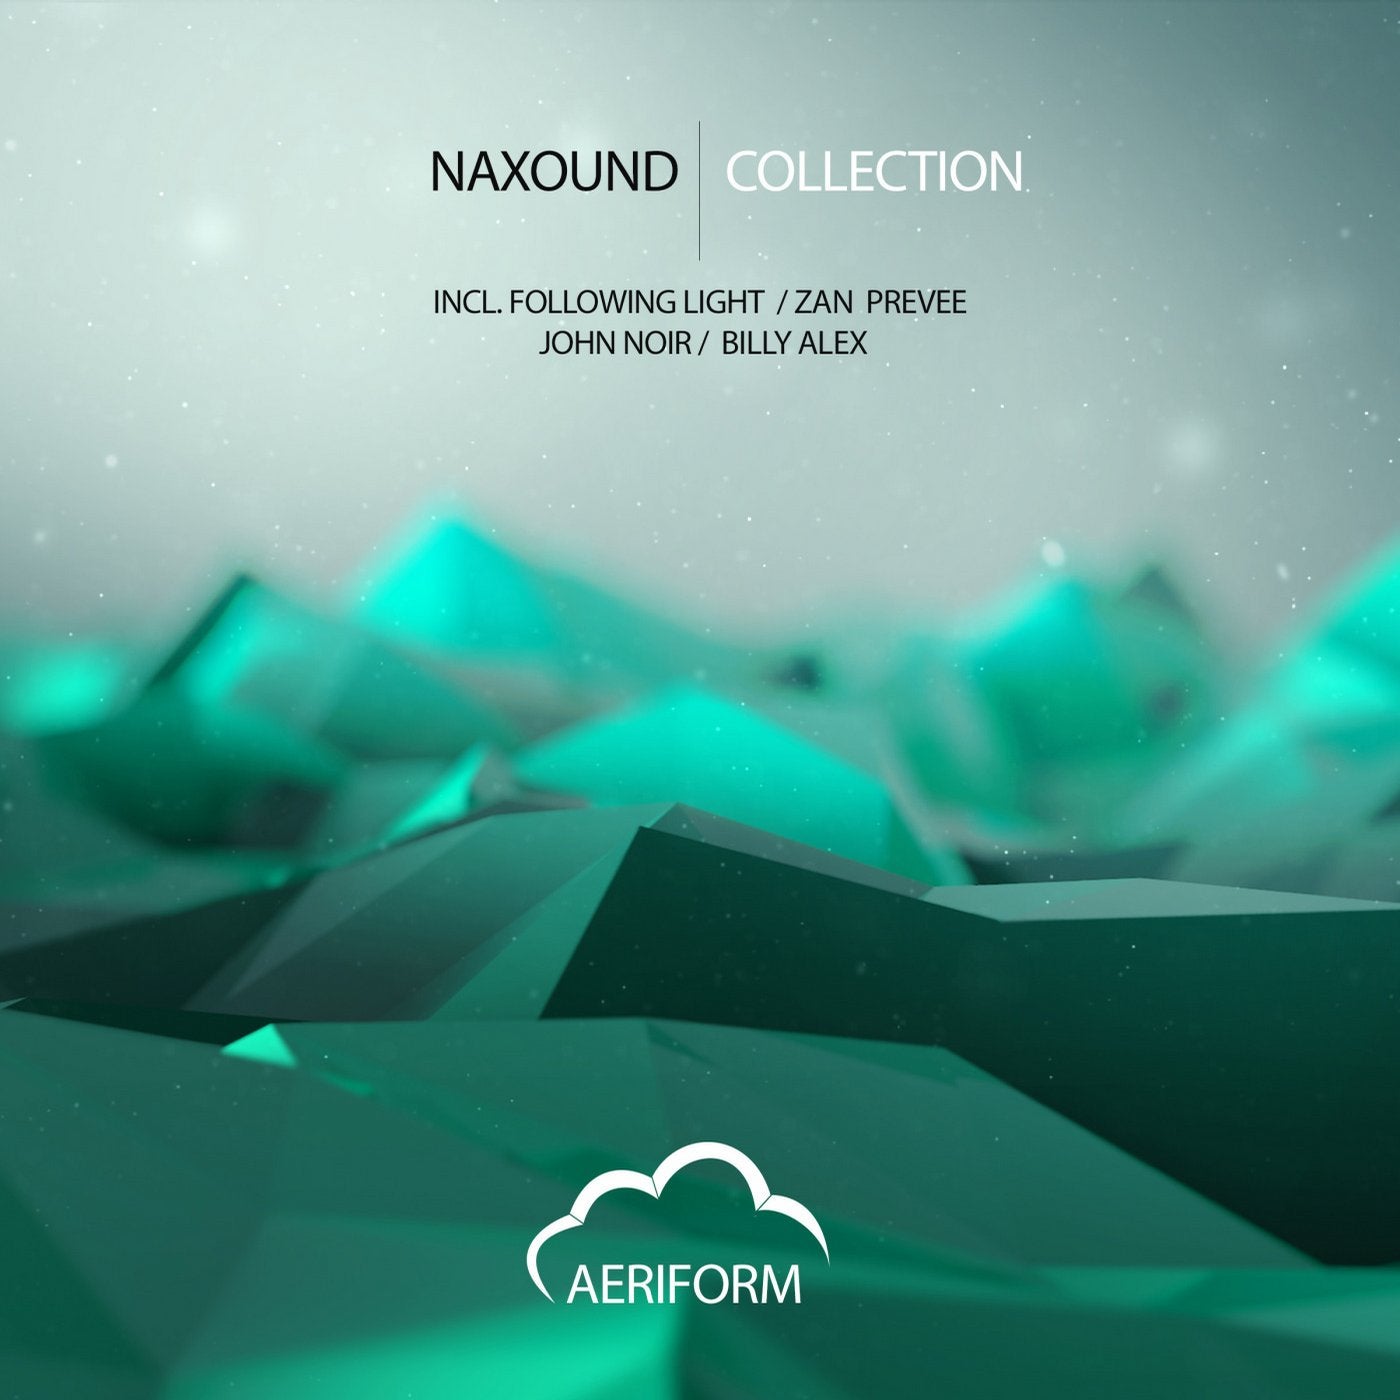 Naxound Collection